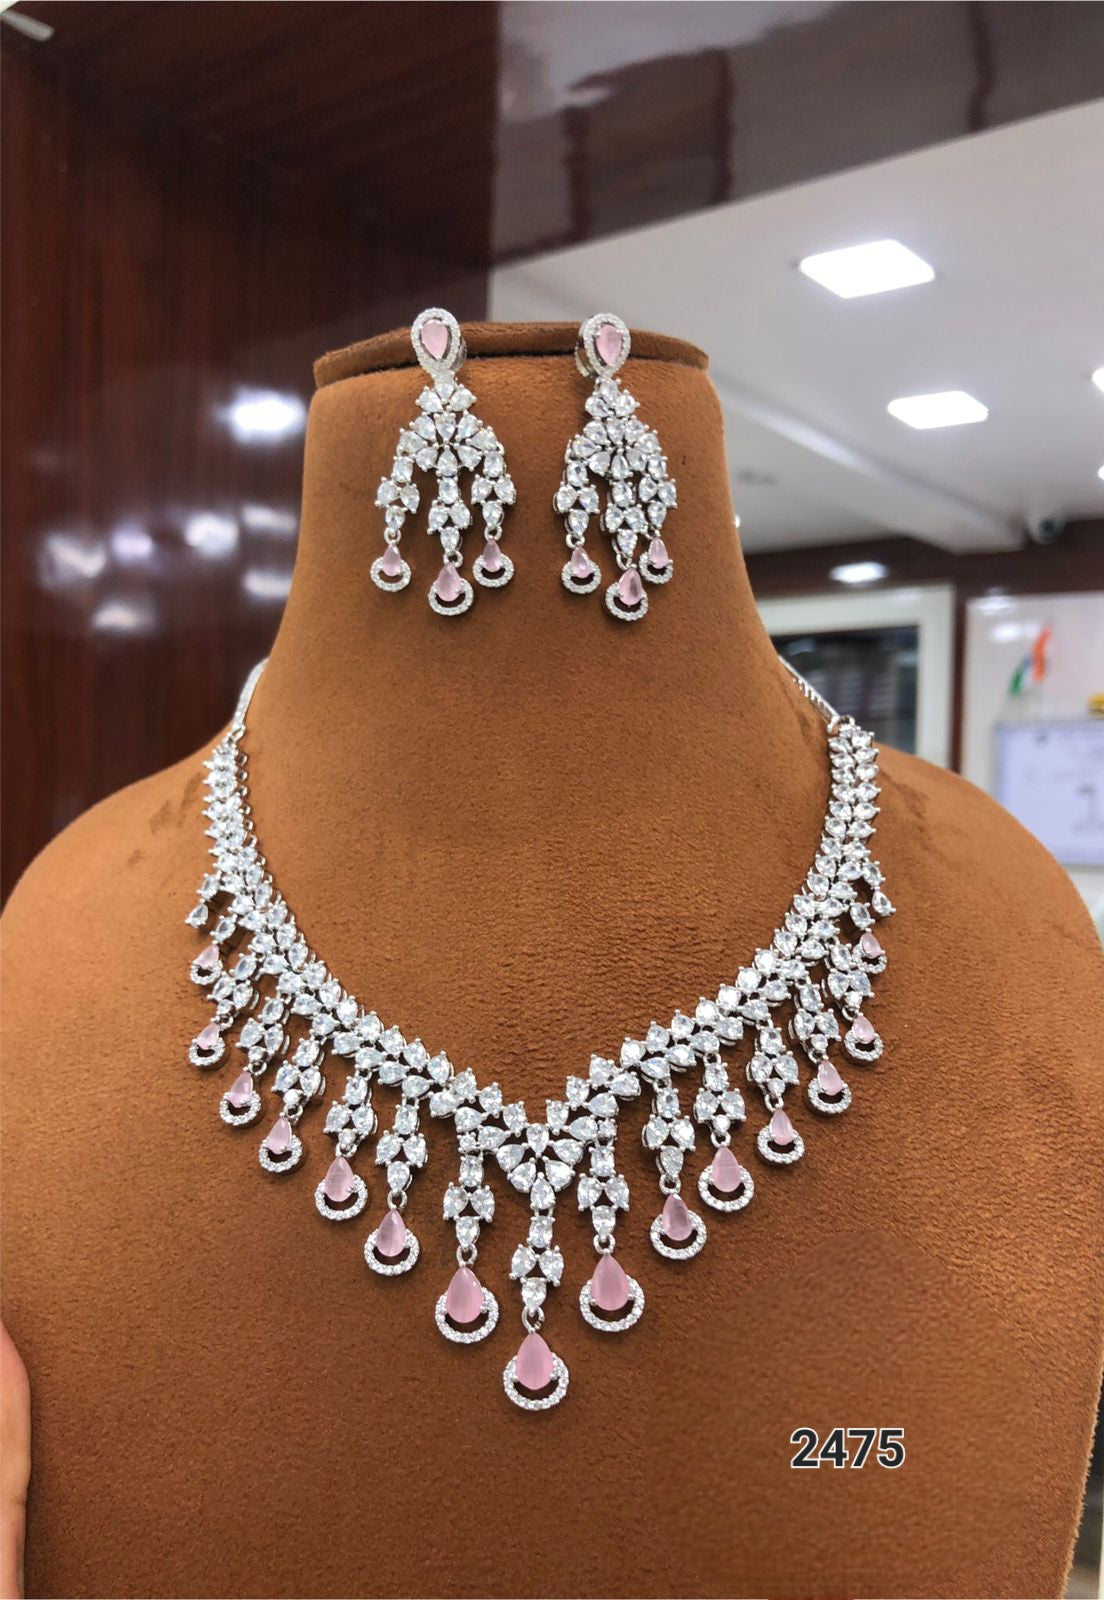 Radiant Elegance: The American Diamond Necklace and Earring Set by Sagunittujewel